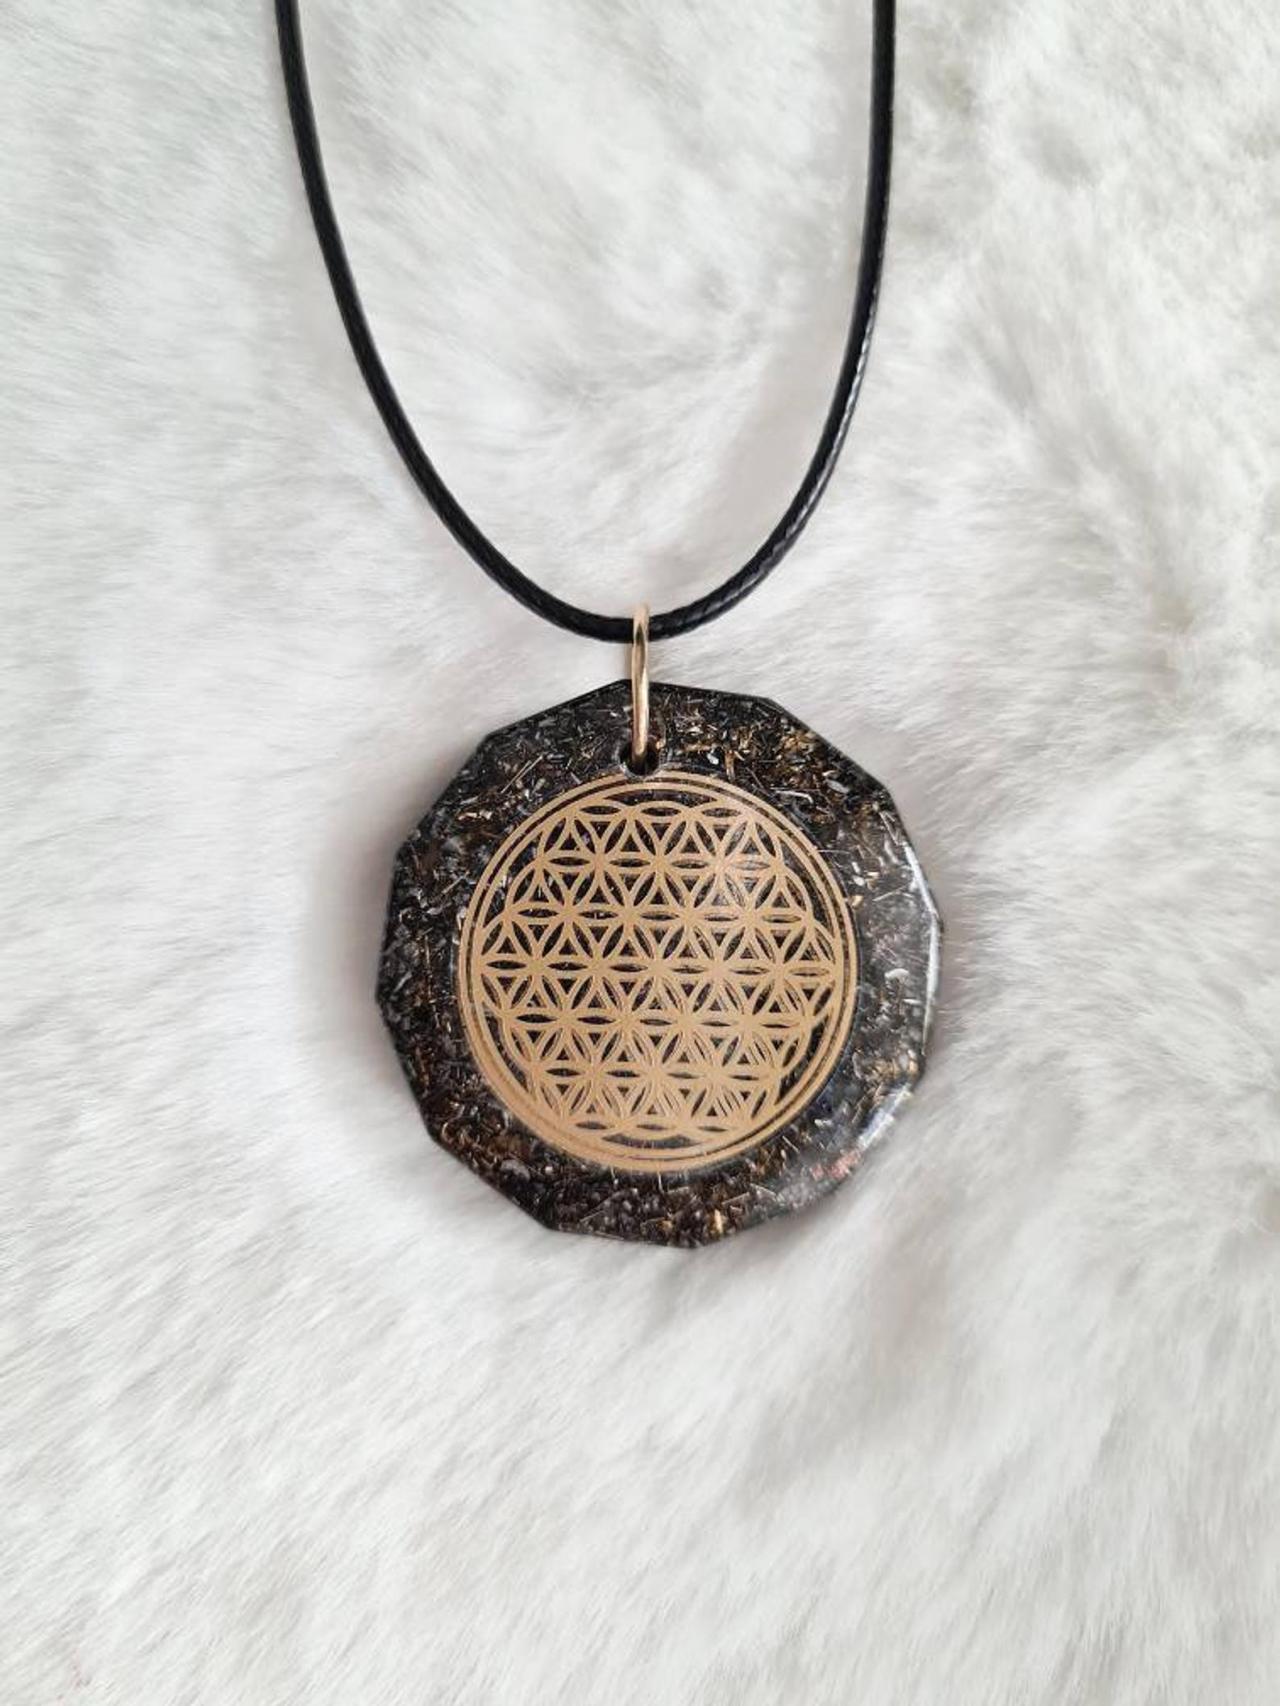 Very Strong Orgone Orgonite Pendant / Emf Protection / 4g - 5g Buster/ Healing Energy Crystals Shungite Monoatomic Gold